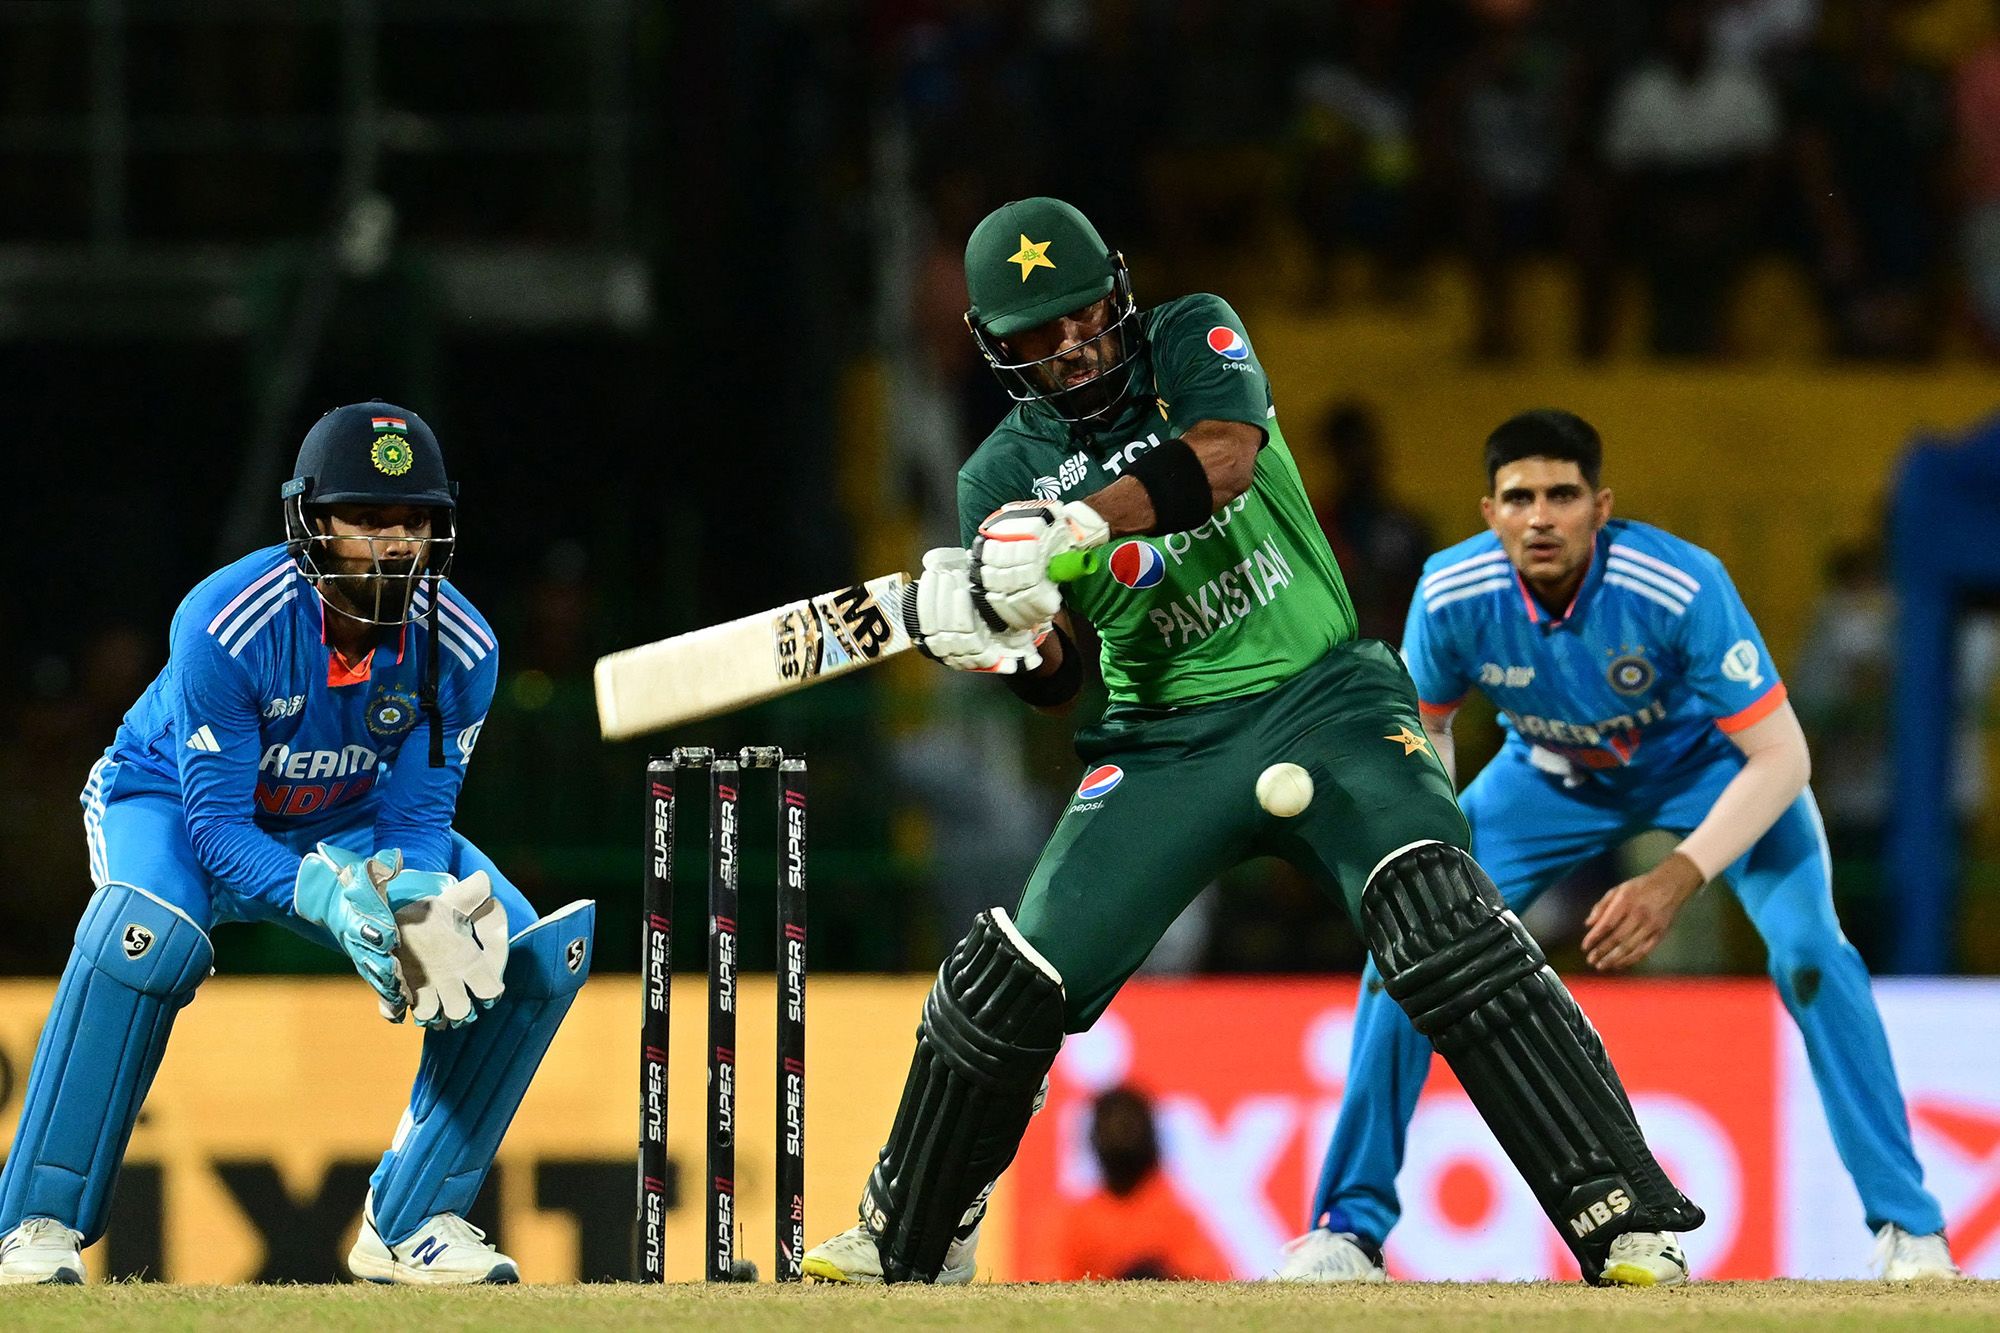 India vs Pakistan: The T20 World Cup's Unmissable Clash